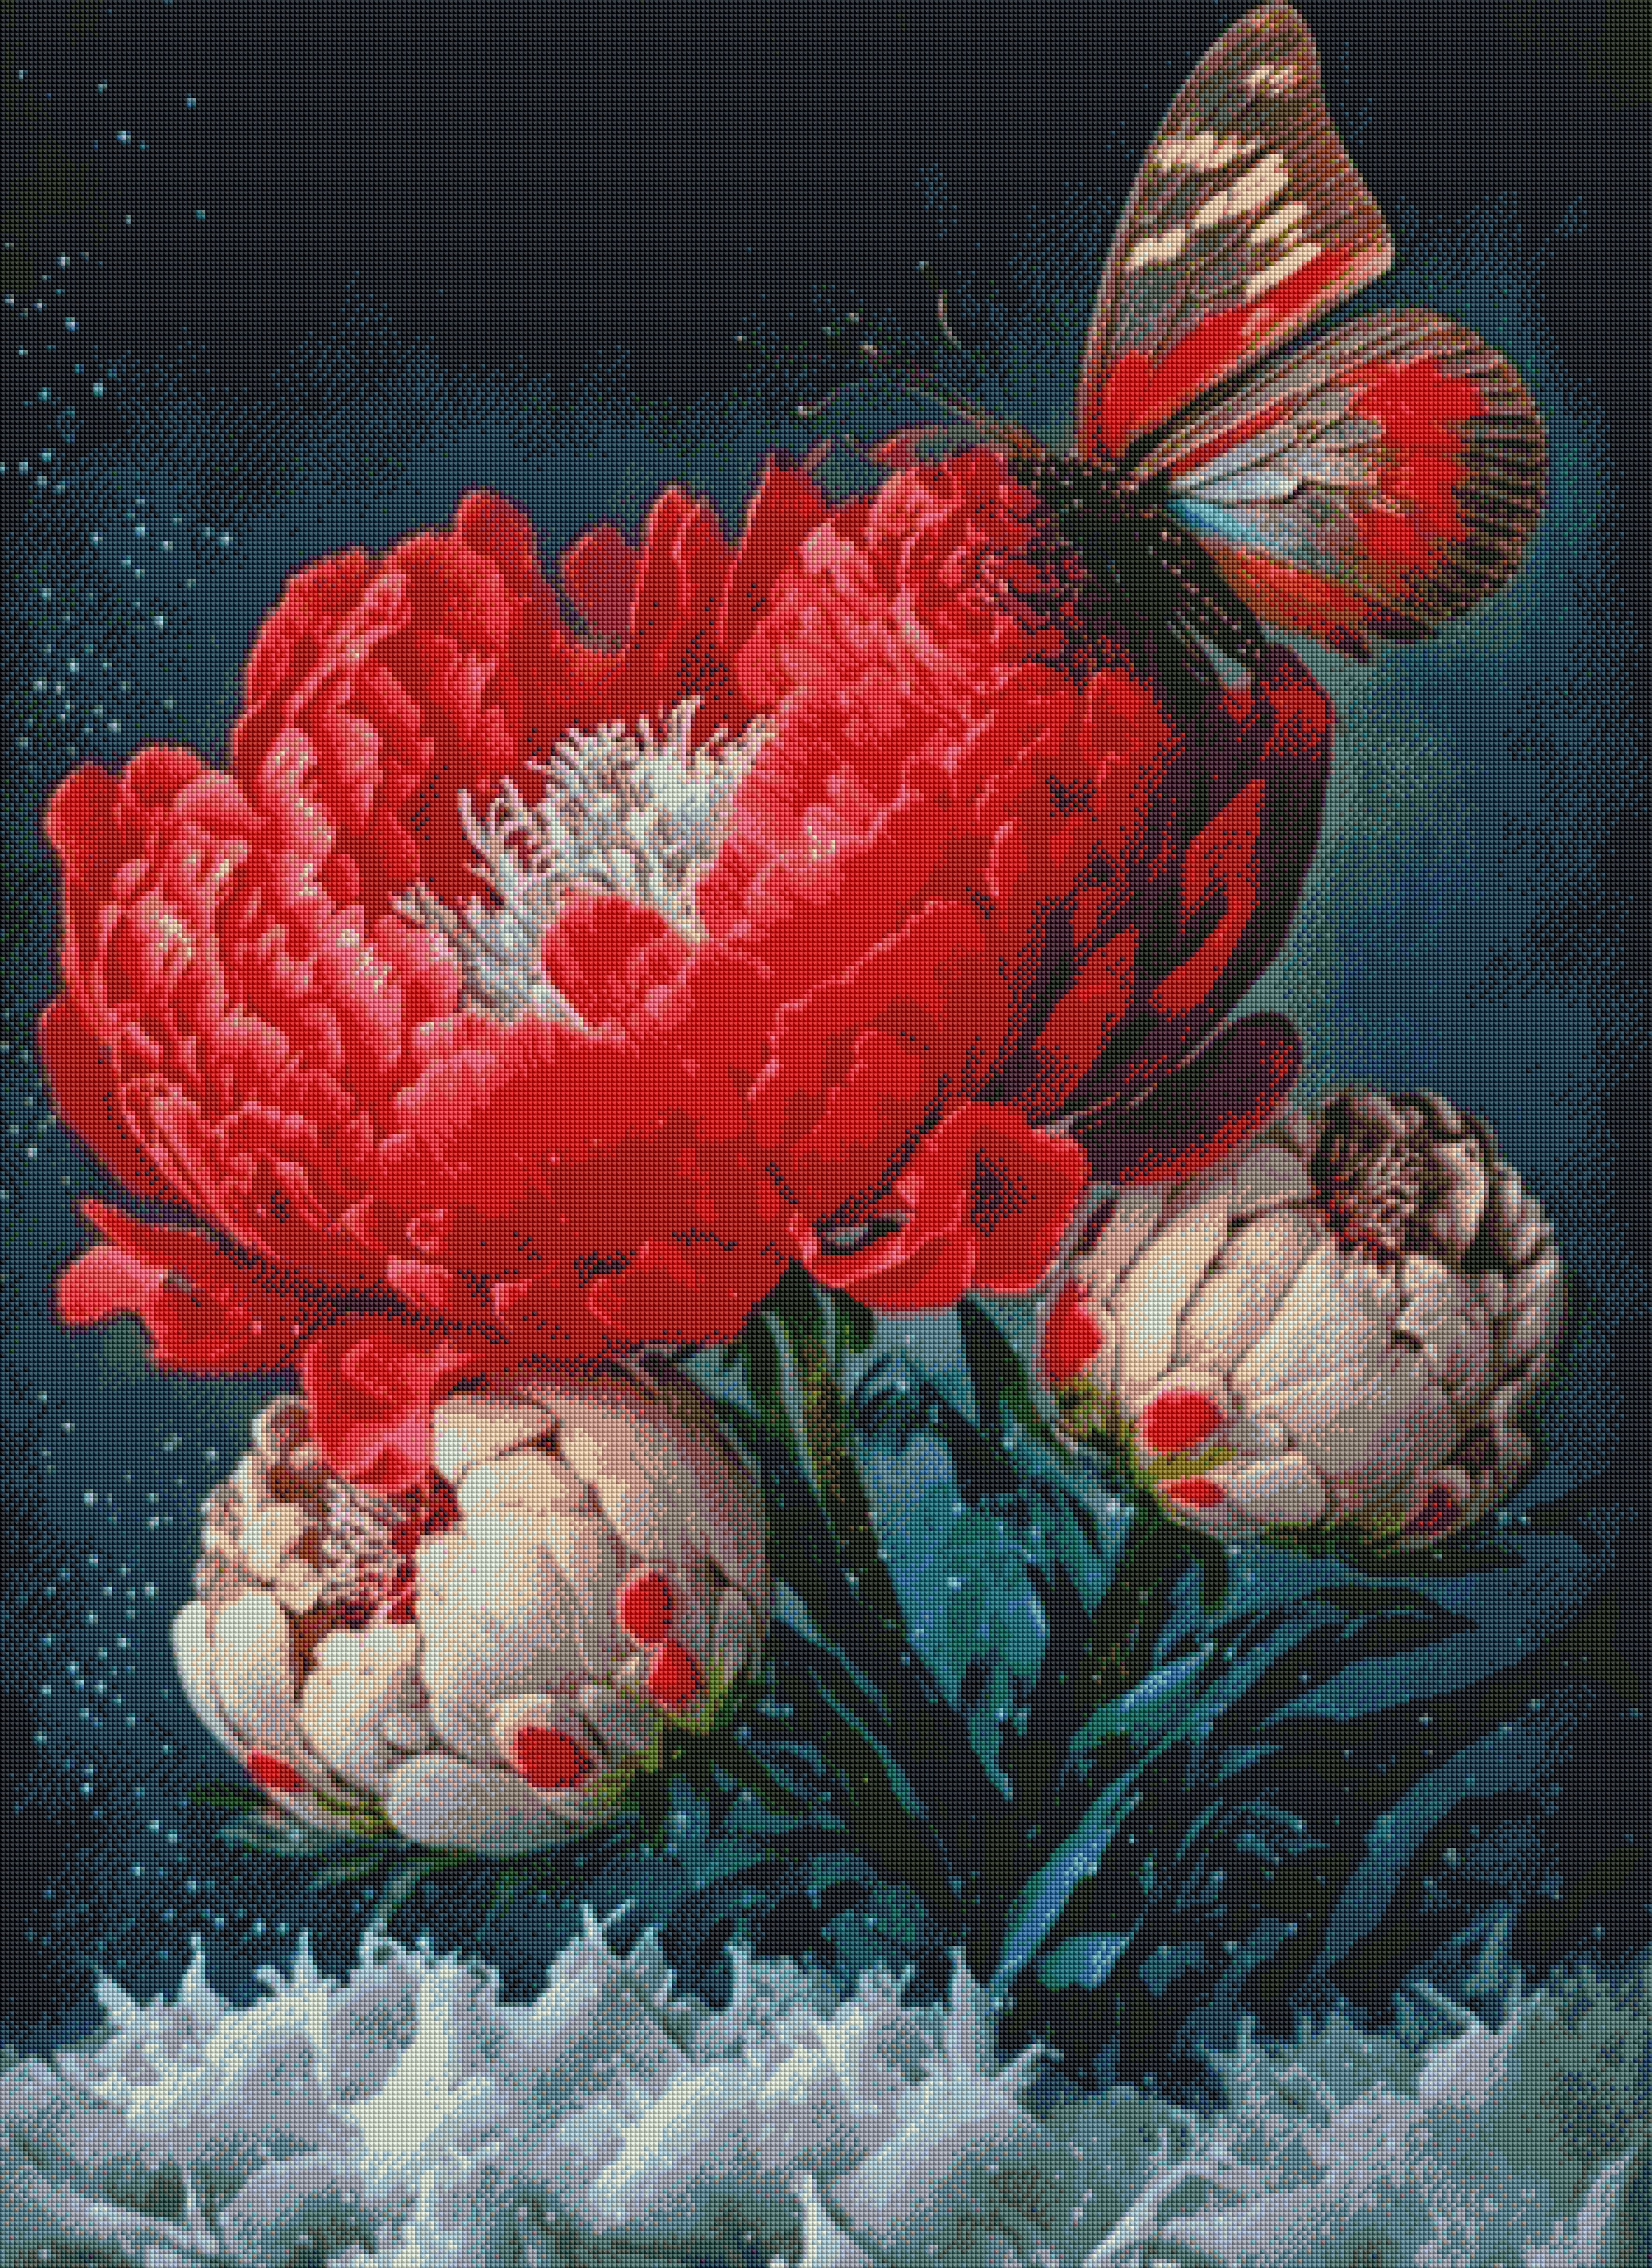 Diamond Painting - Flowers and Butterflies